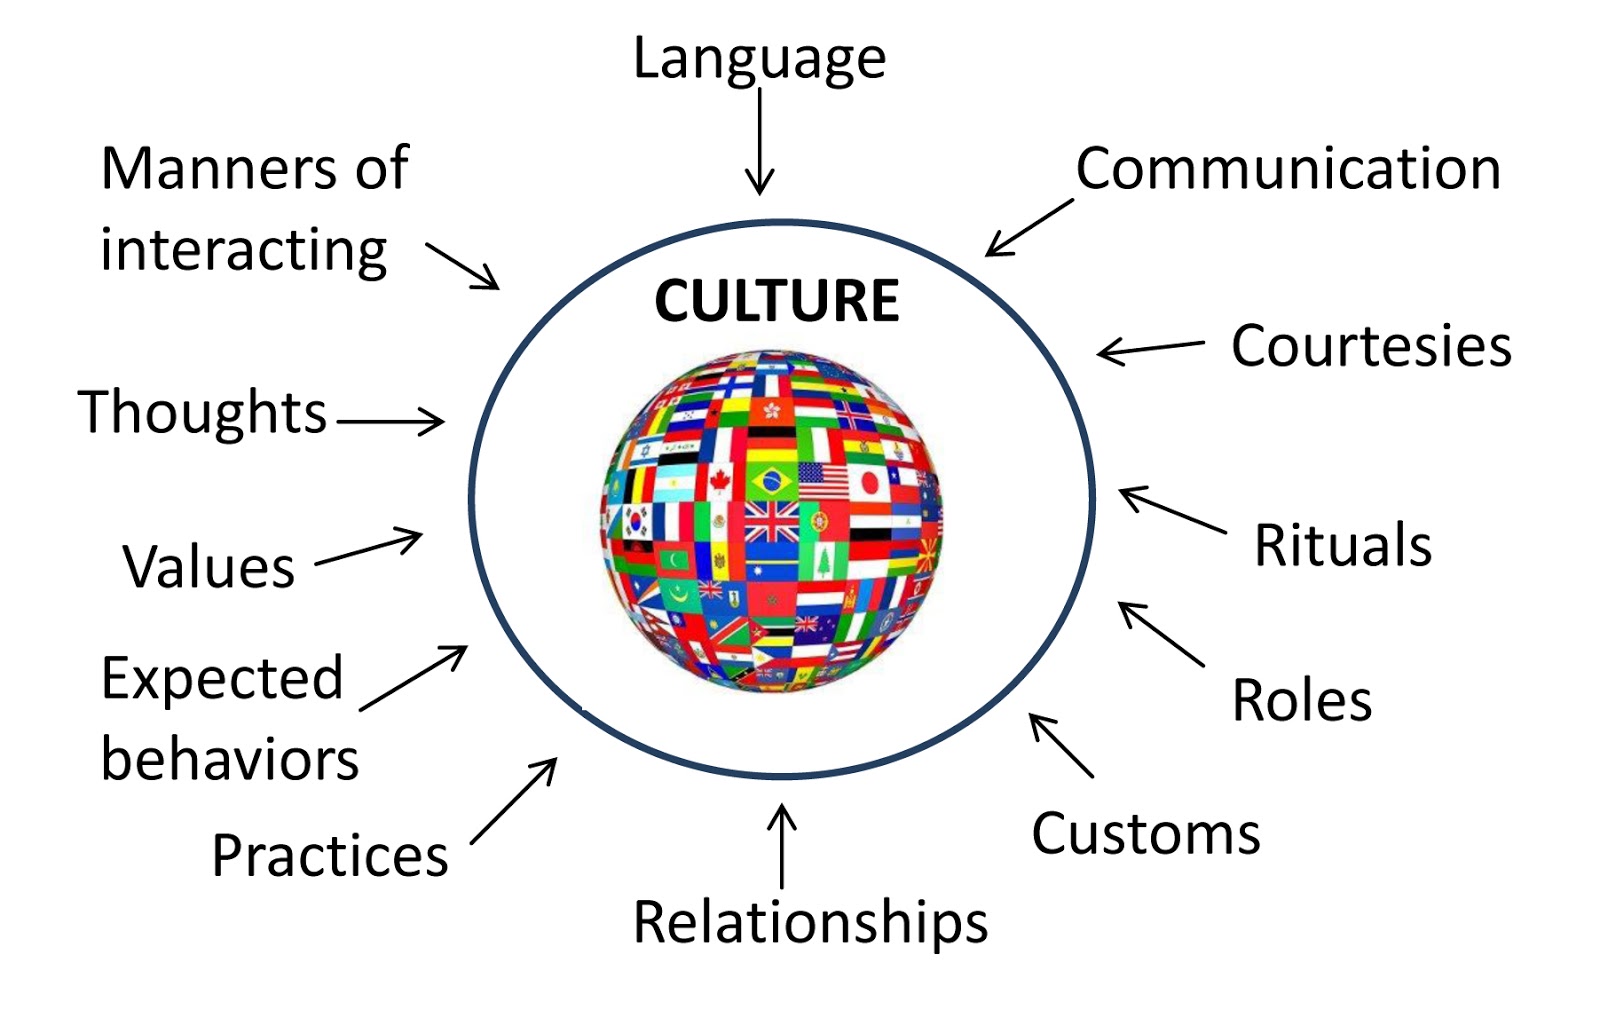 critical consciousness multicultural education